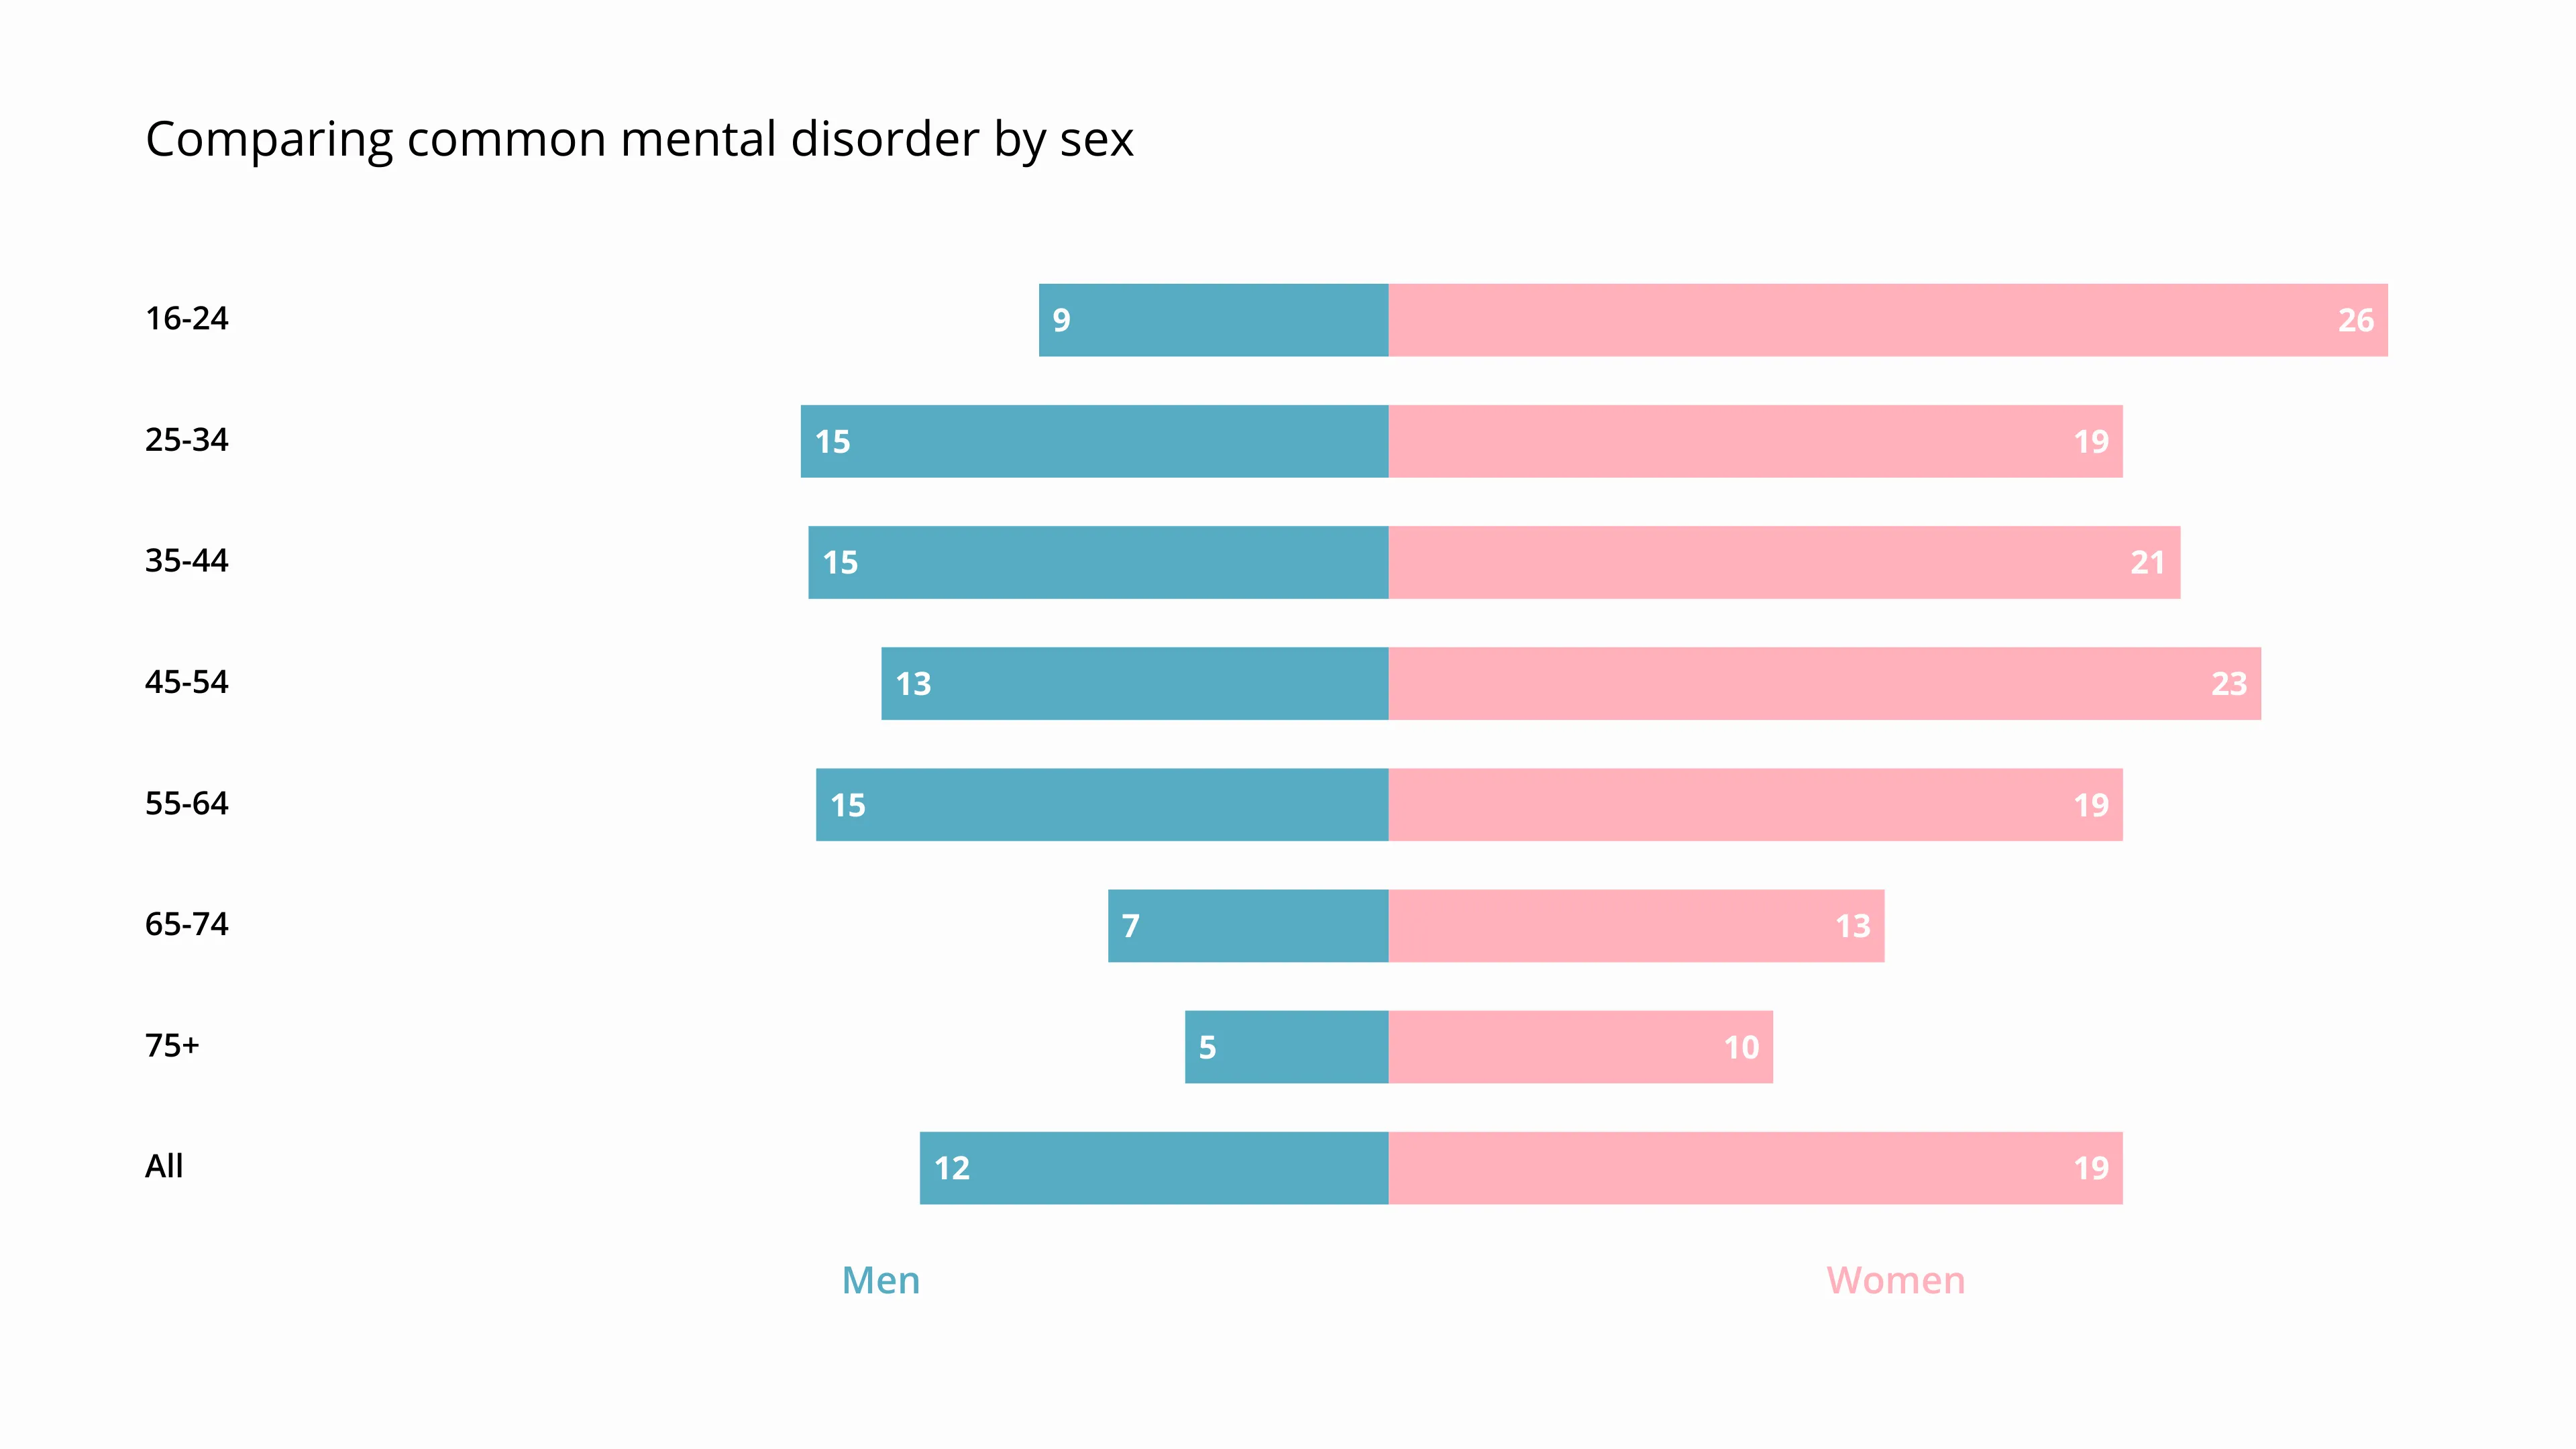 Comparing common mental disorder by sex